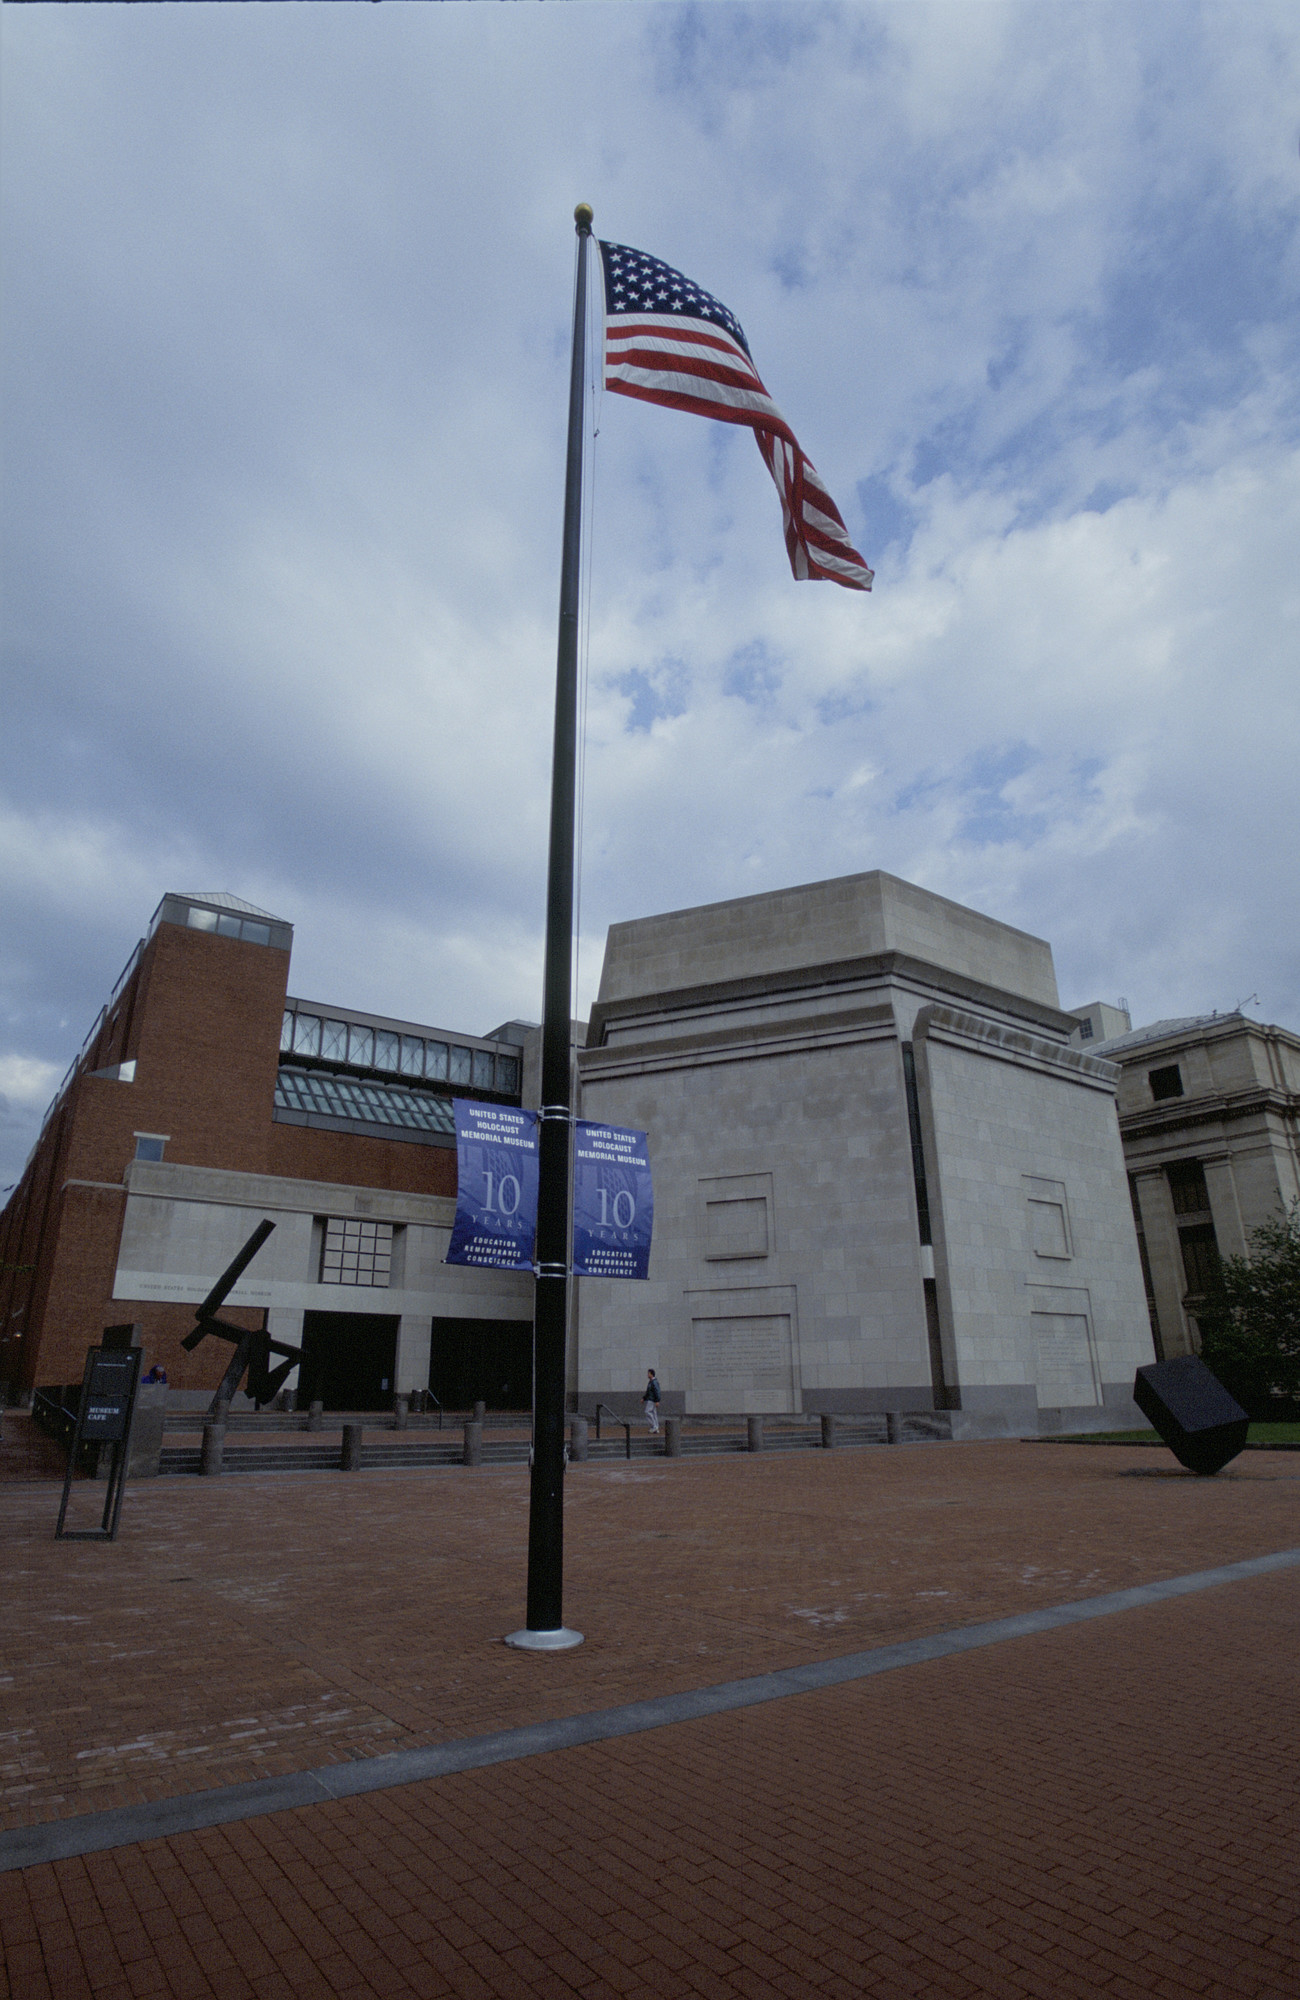 View of Eisenhower Plaza decorated with 10th anniversary banners on the flag pole at the U.S. Holocaust Memorial Museum on the day of its10th anniversary.